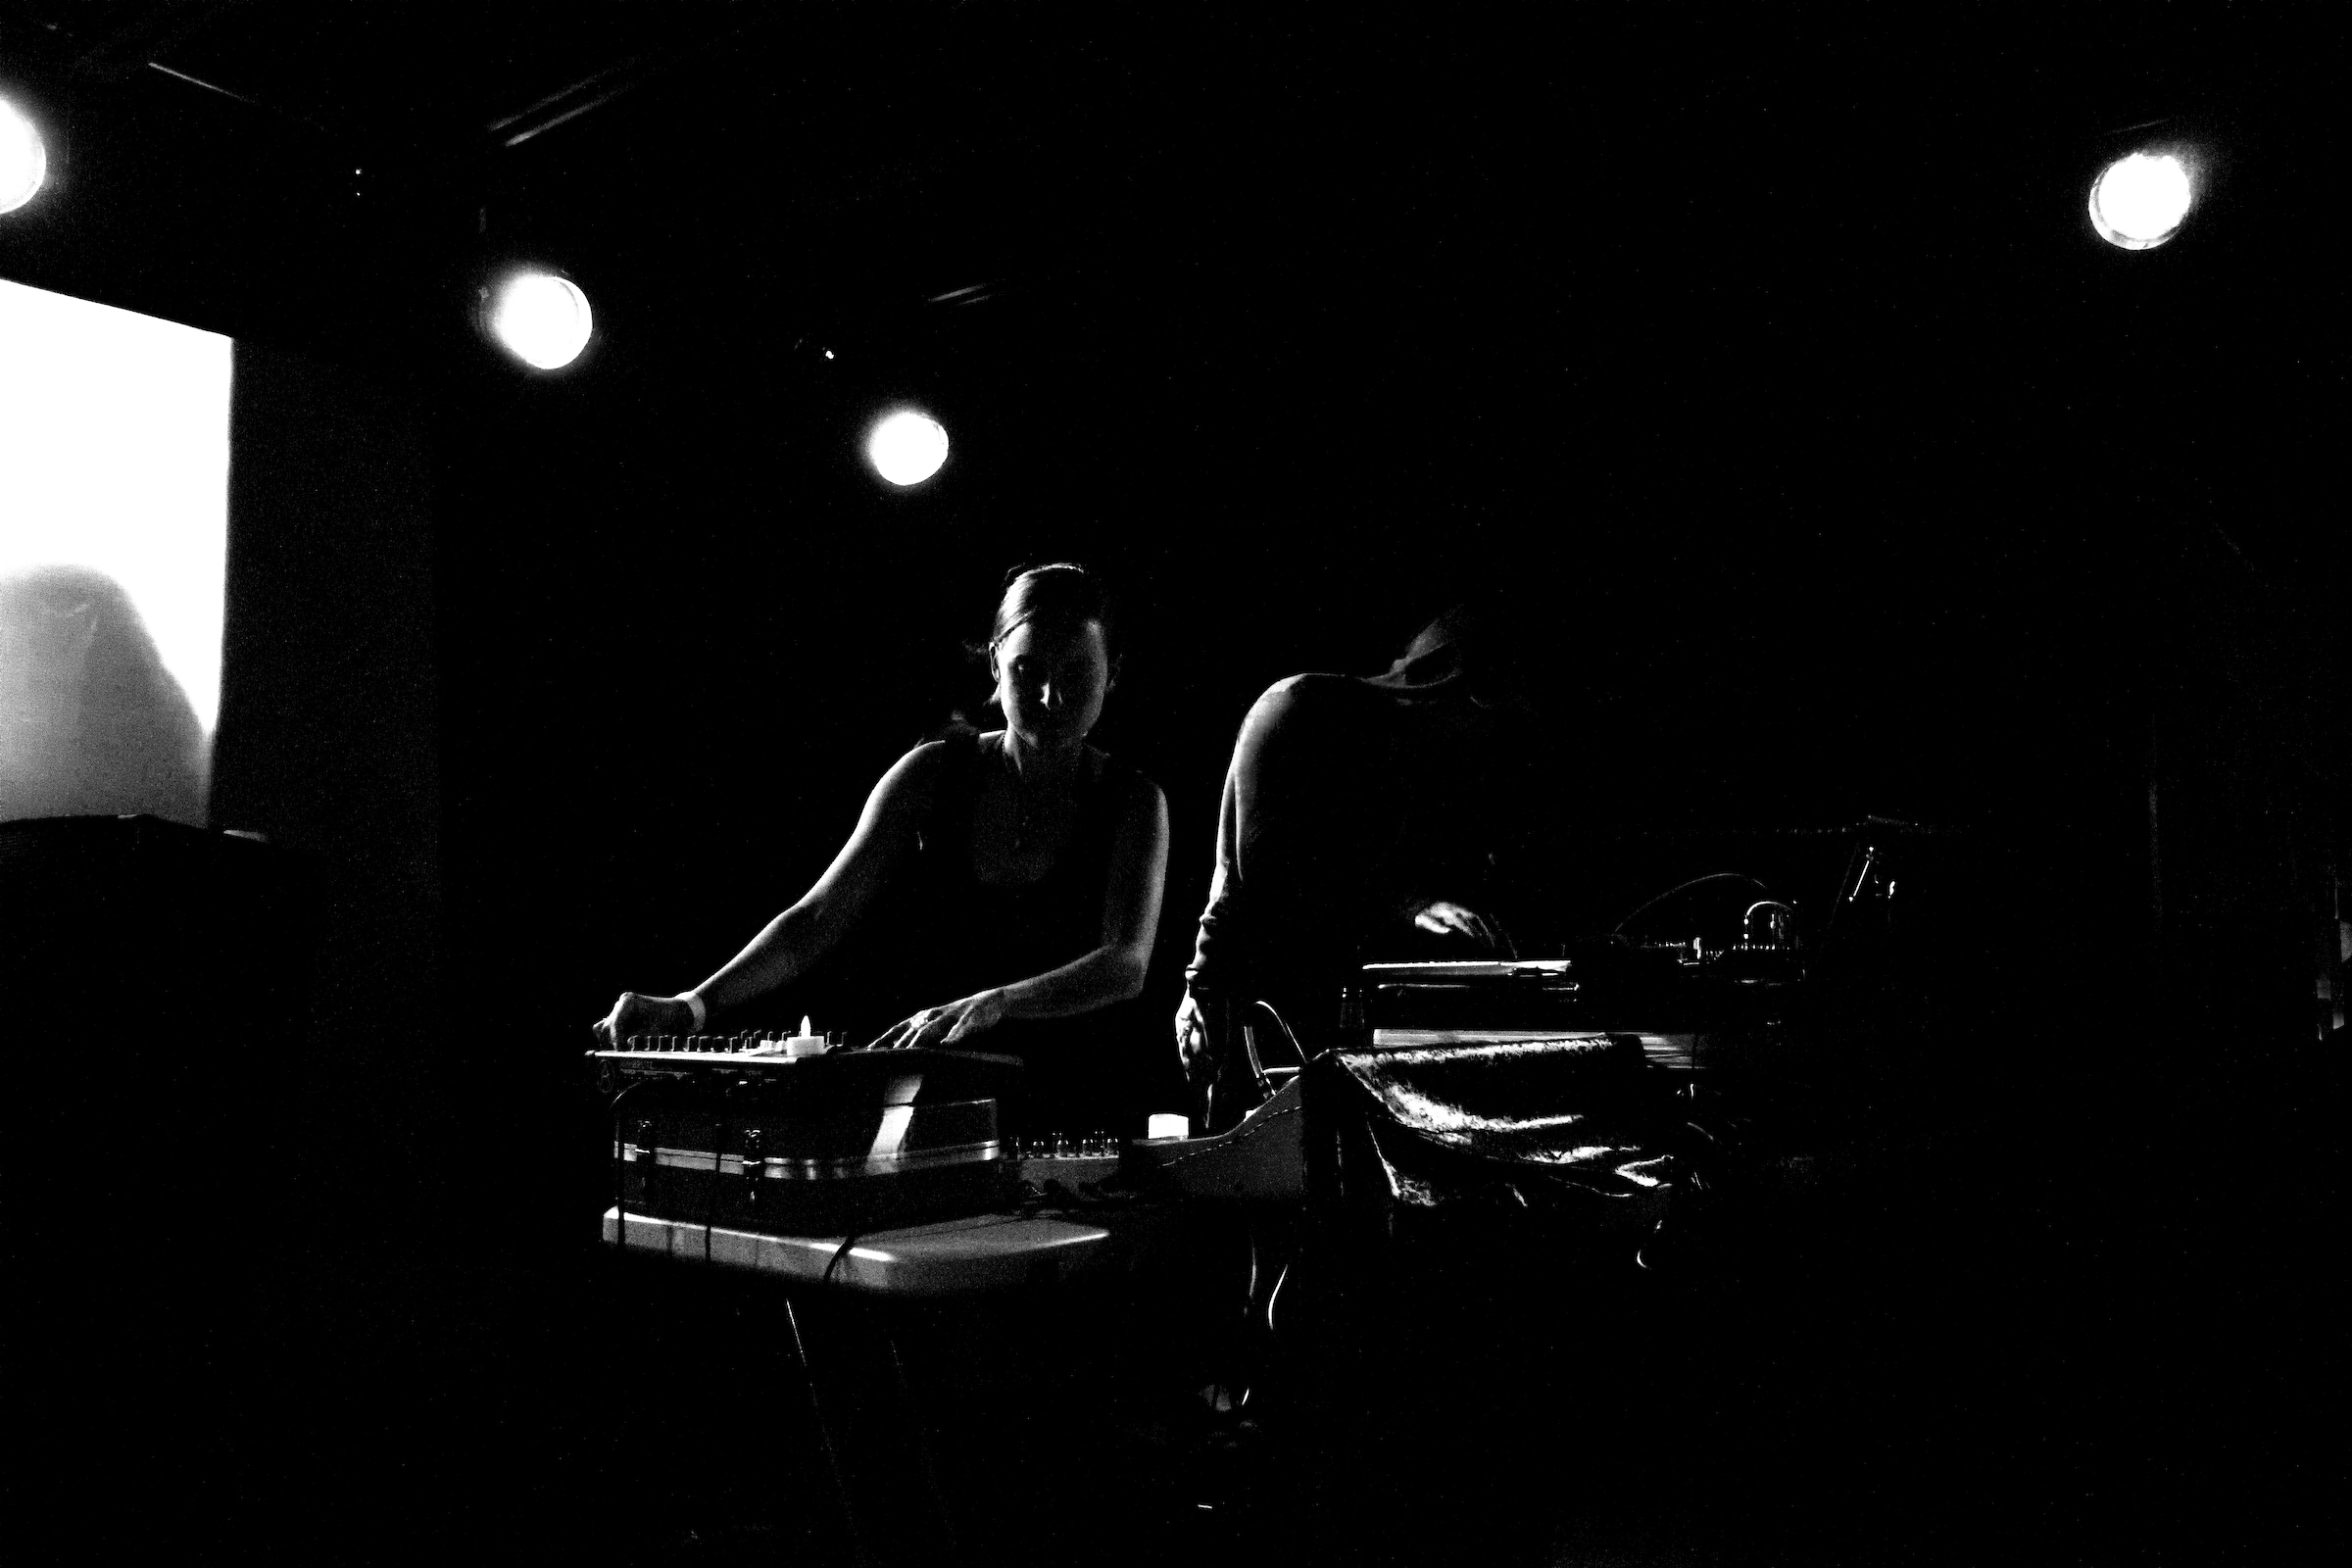 The enigmatic experimental folk pop electronica band Black Moth Super Rainbow graced the Firebird in St. Louis, Missouri on May 15th, 2013.